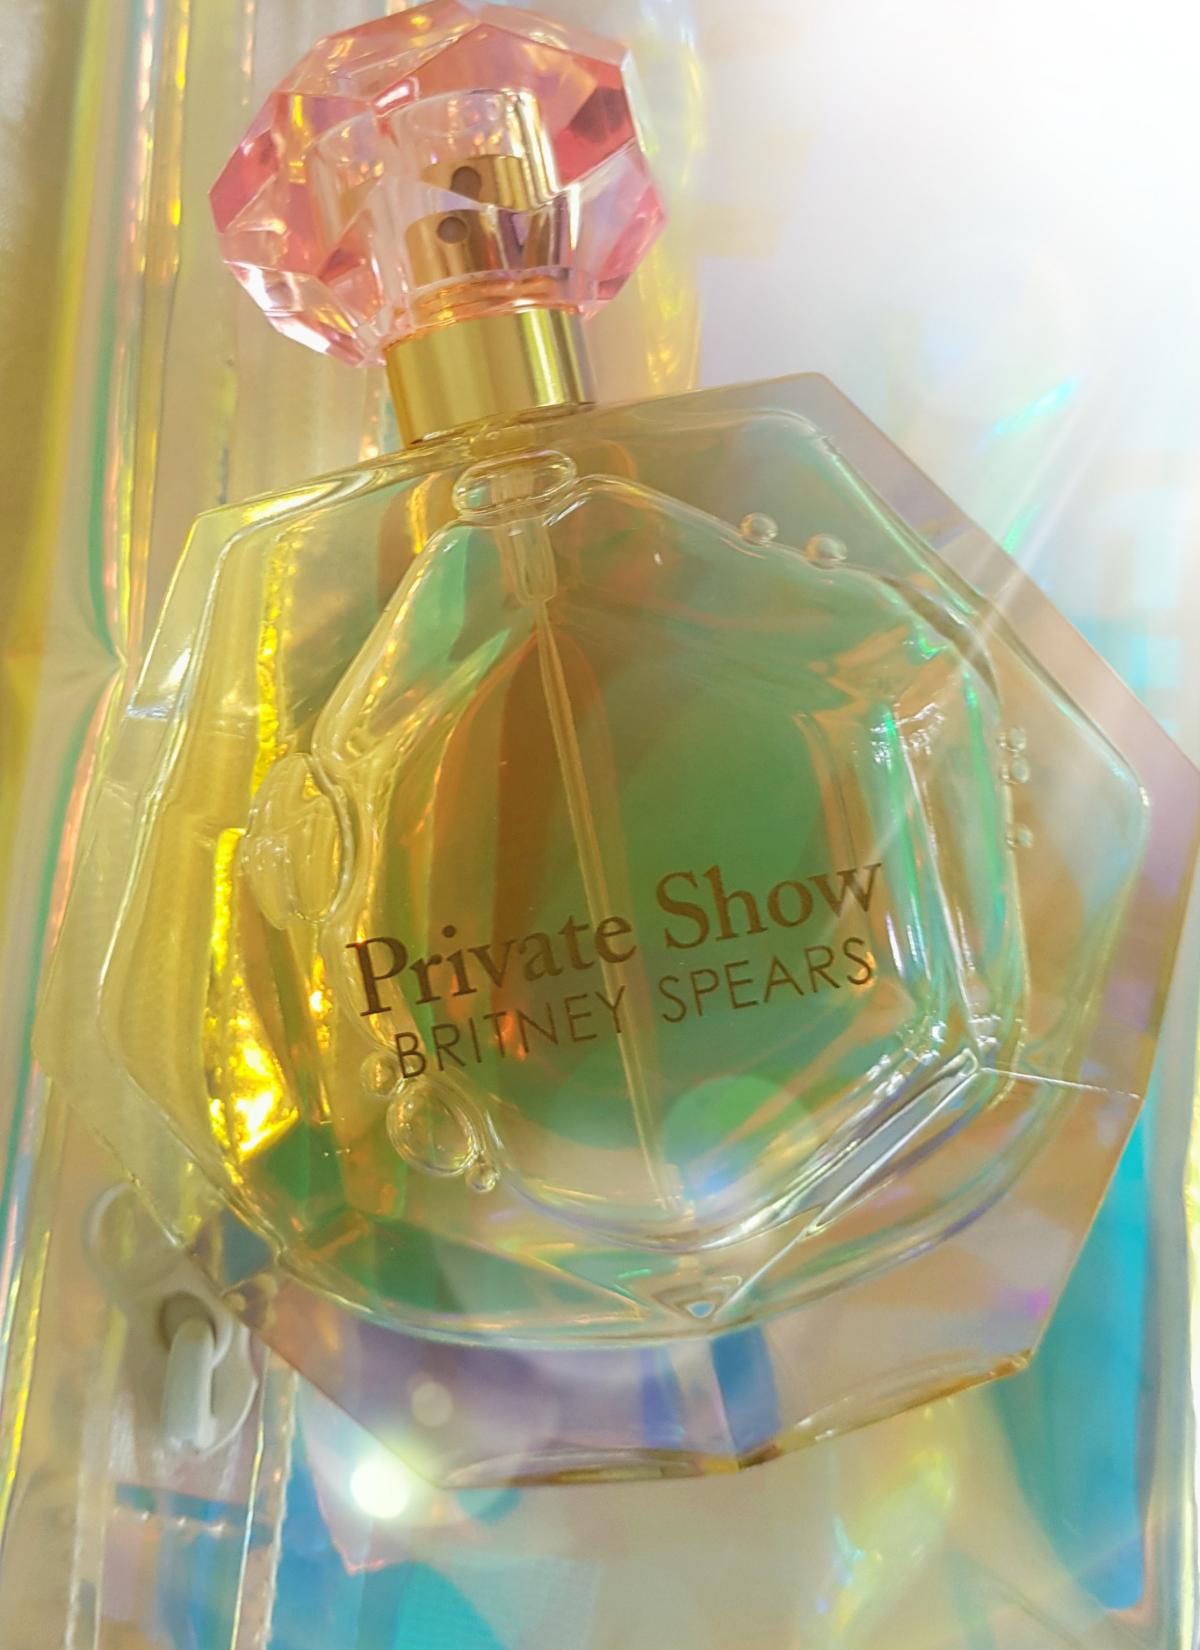 Private Show Britney Spears perfume - a fragrance for women 2016